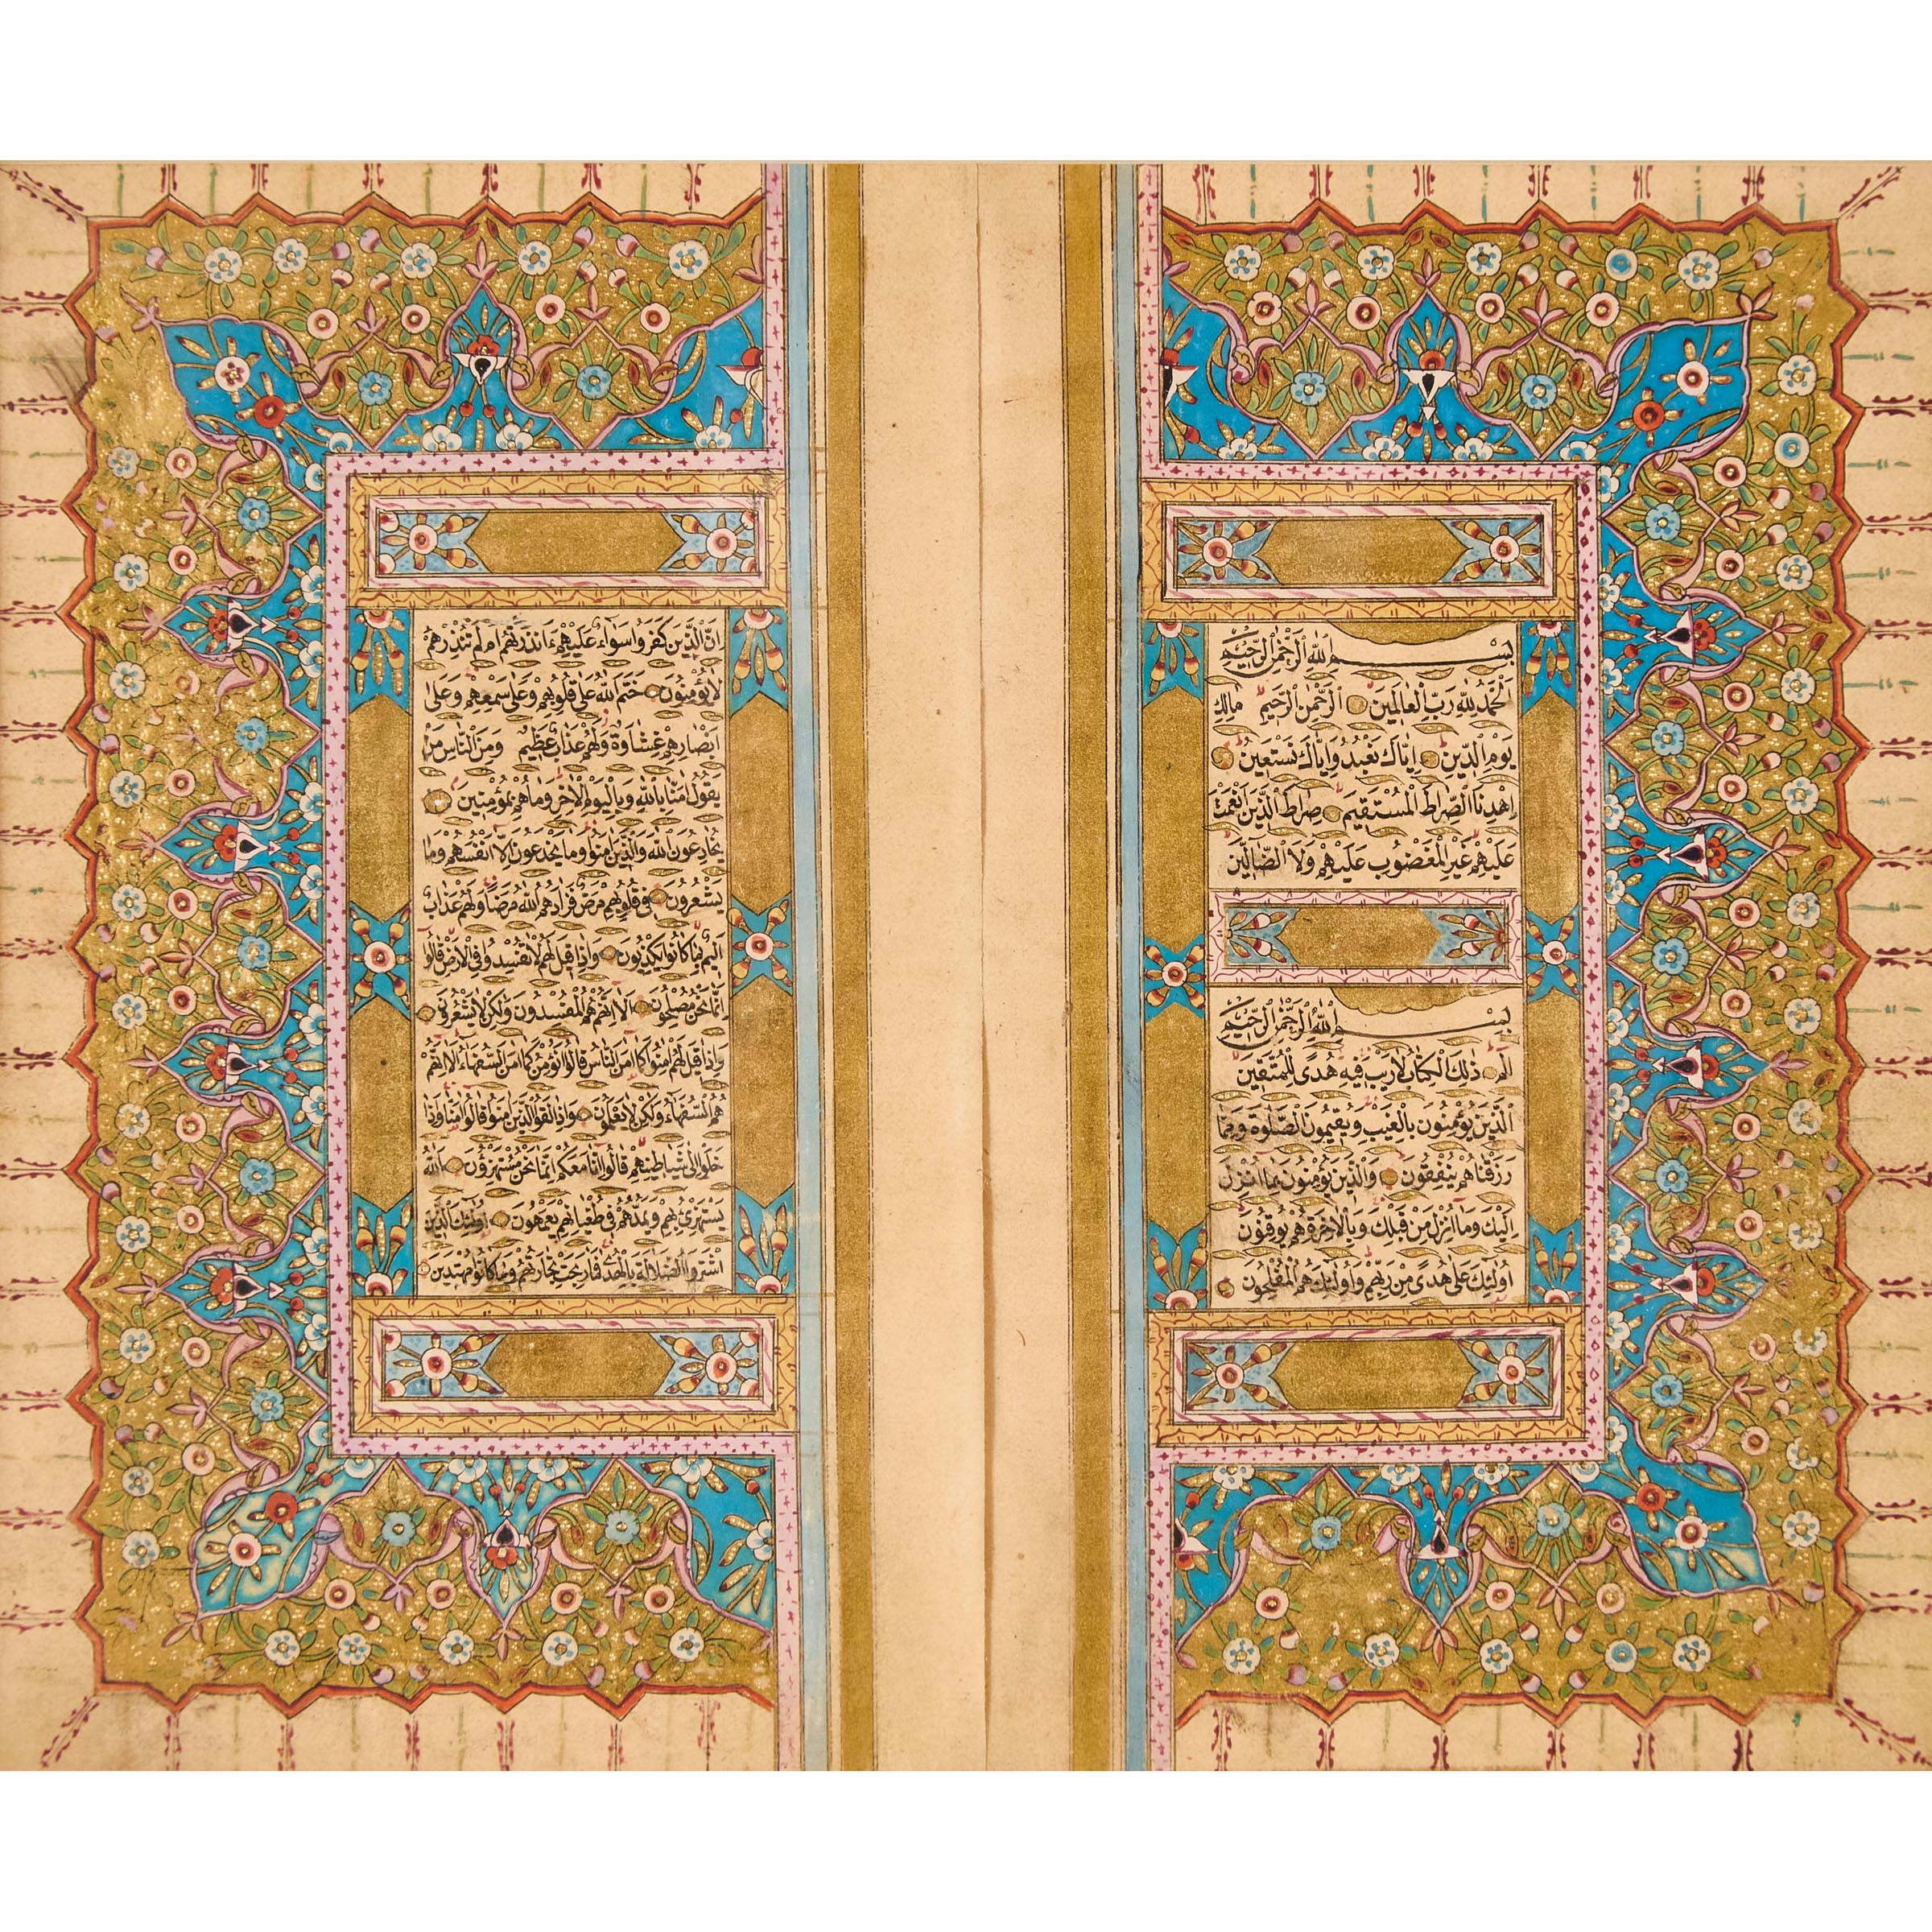 Two Illuminated Qur'an Pages, 19th